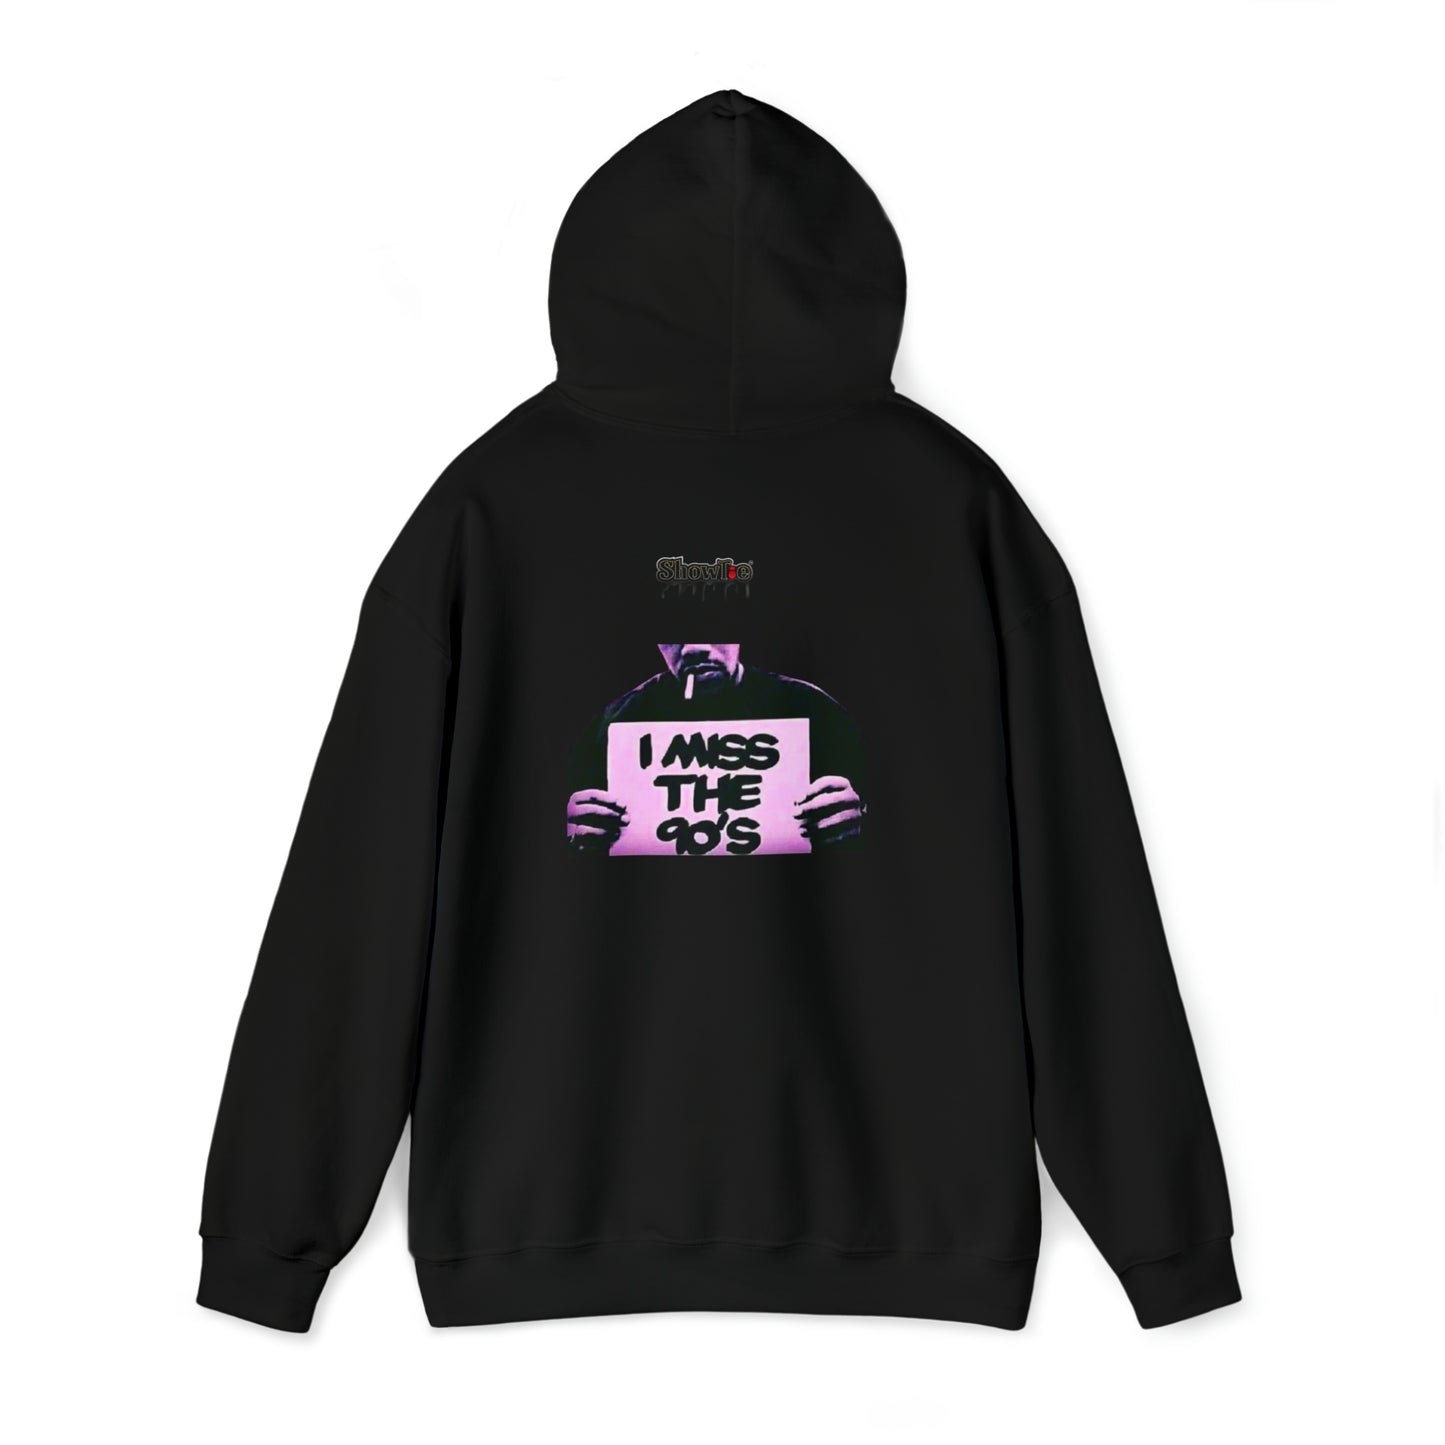 Missing You Showtie Hoodie